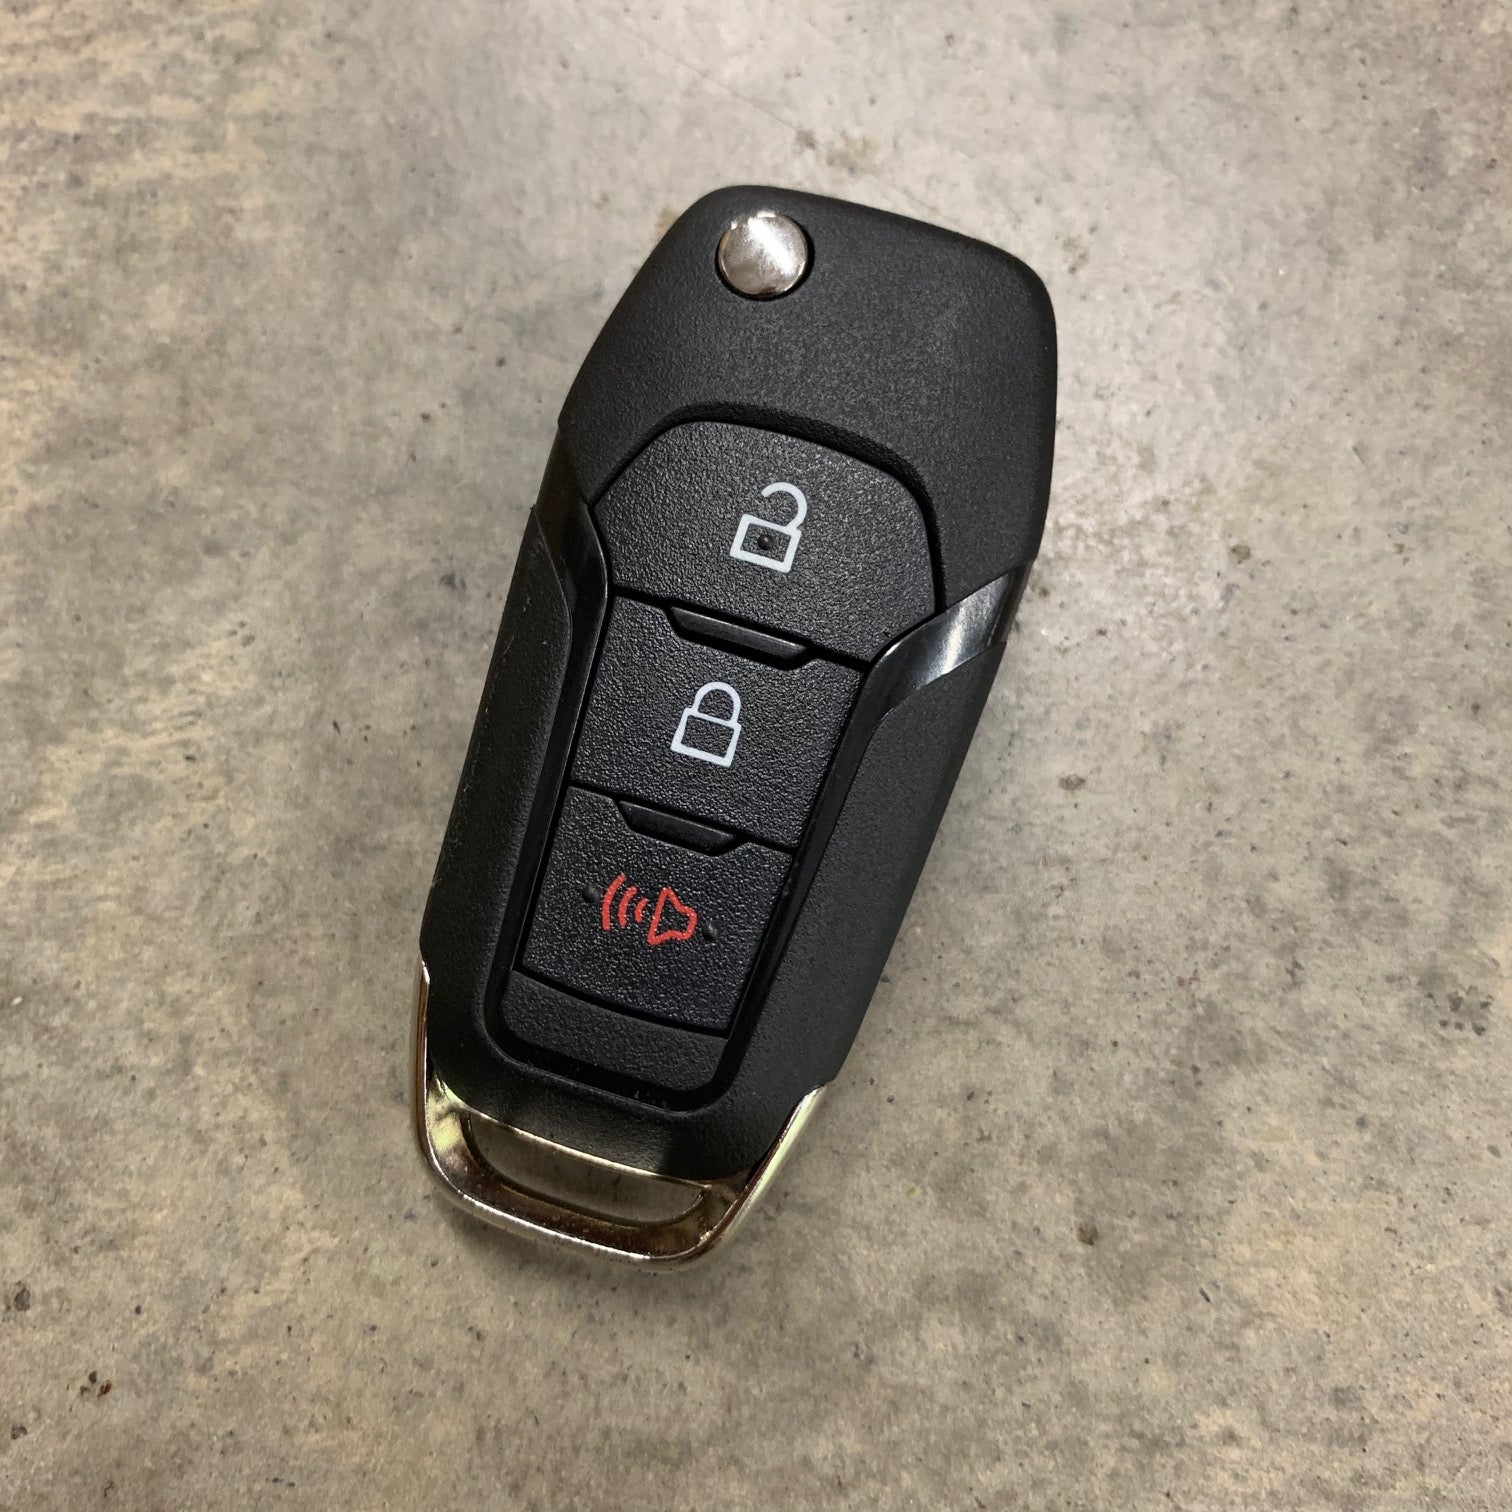 New Ford FOB